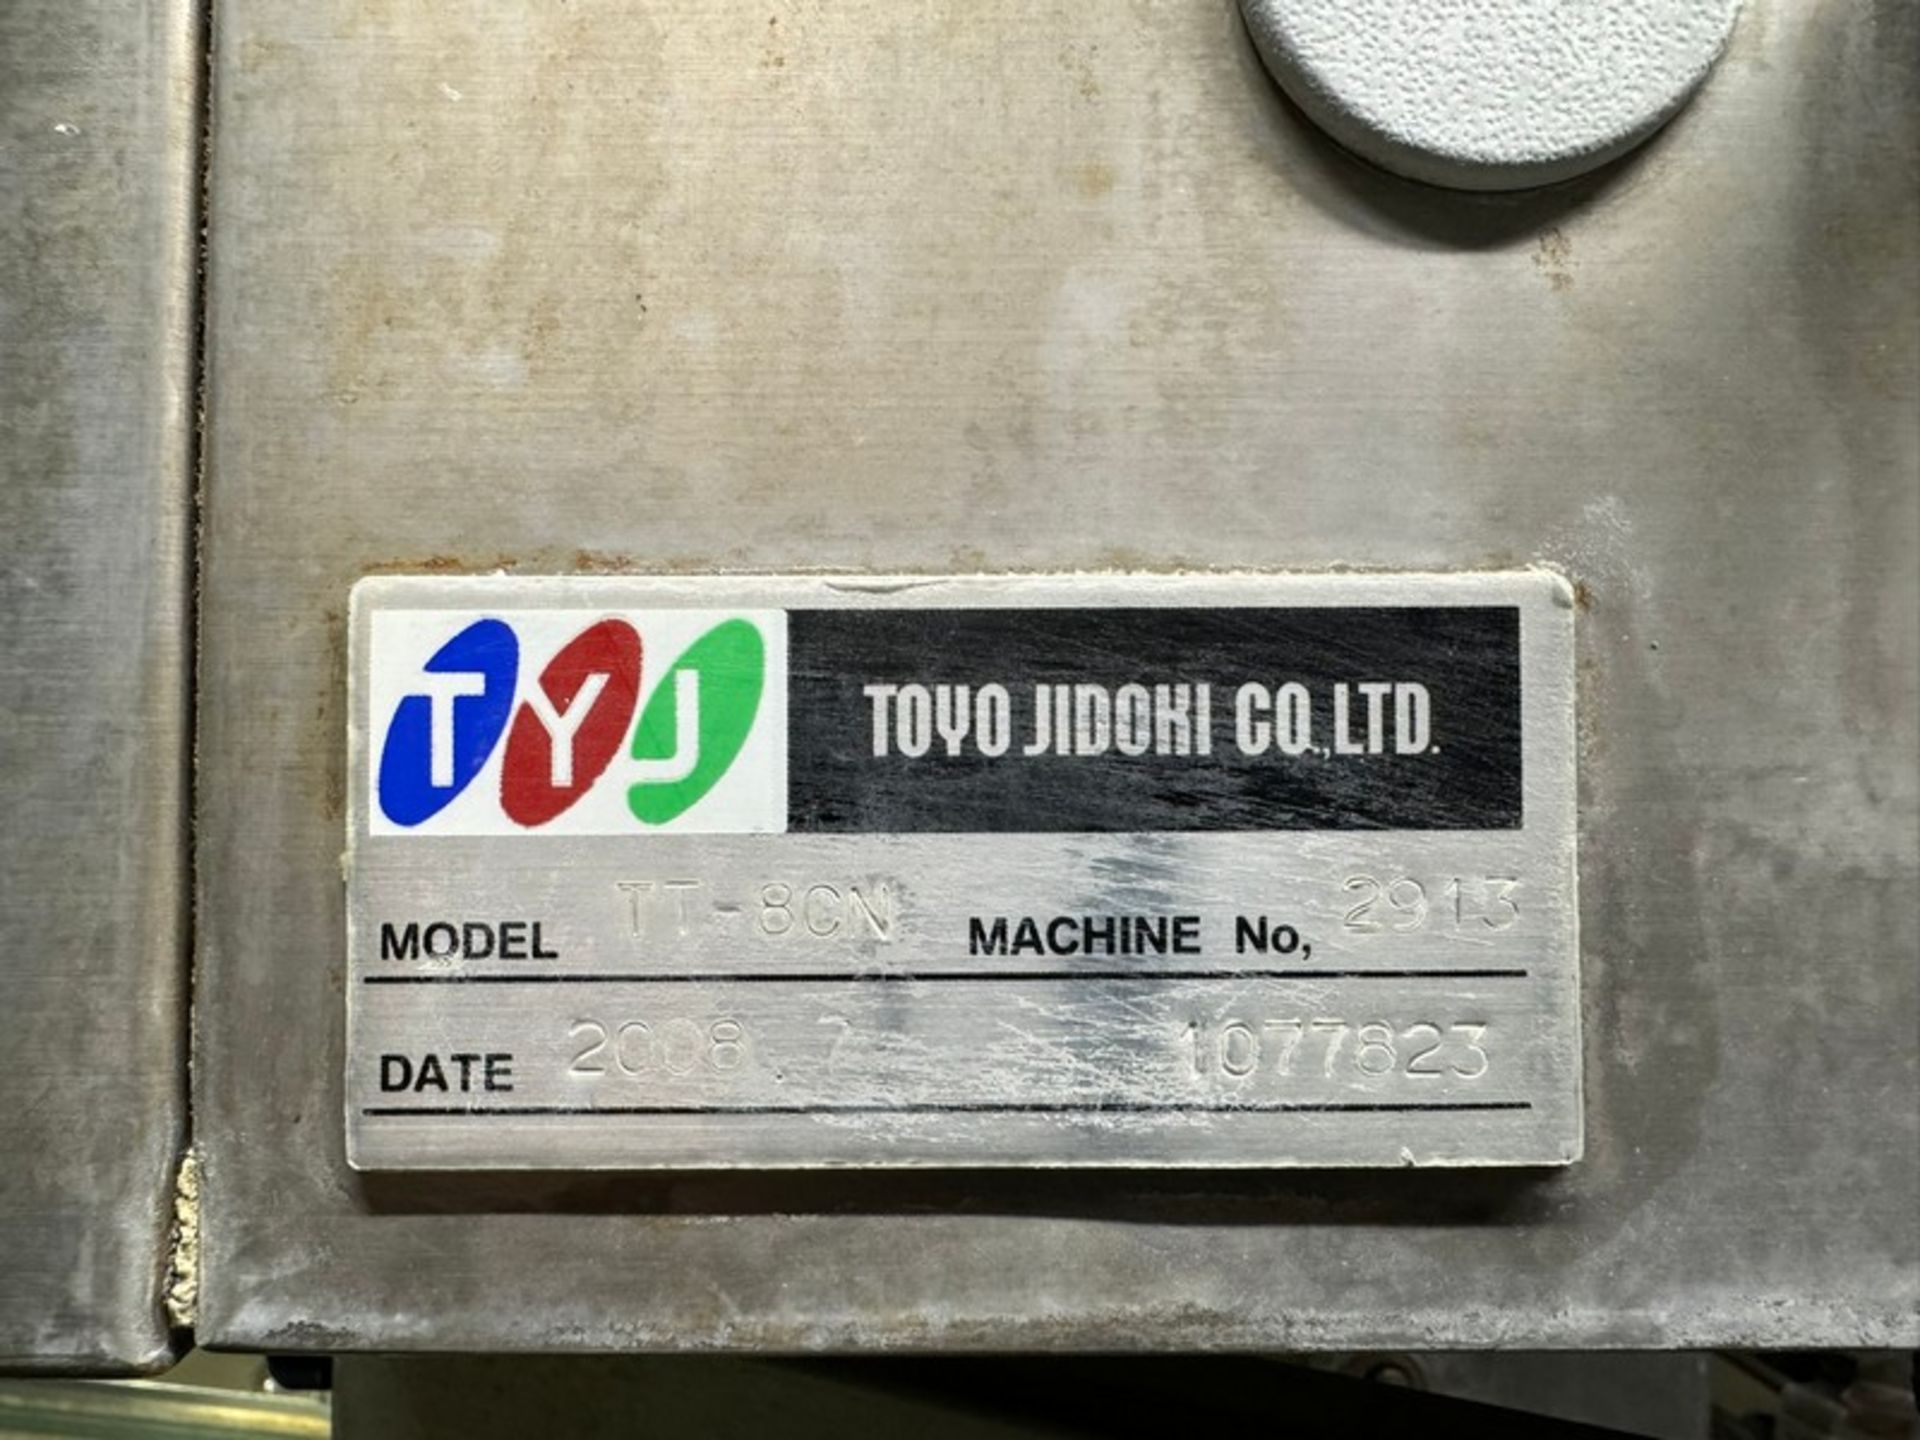 2008 Toyo JIDIKI Co, 8-Head Rotary Pouch Filler, M/N IT-8CN, Machine No. 2912, with Infeed & - Image 12 of 14